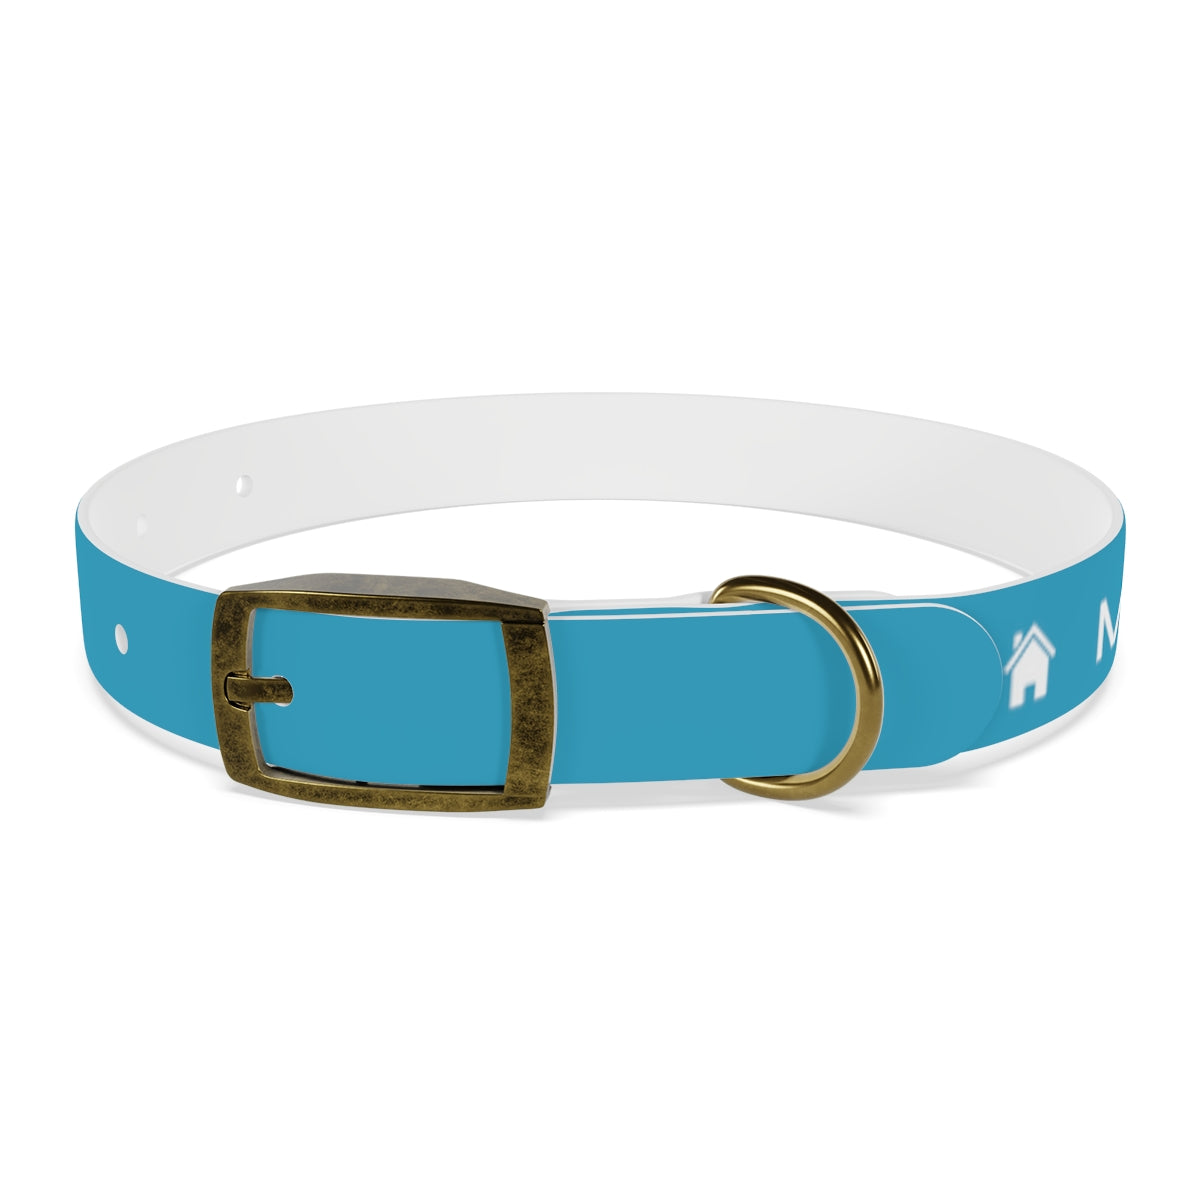 Dog Collar - My Dad Sells Houses - Turquoise